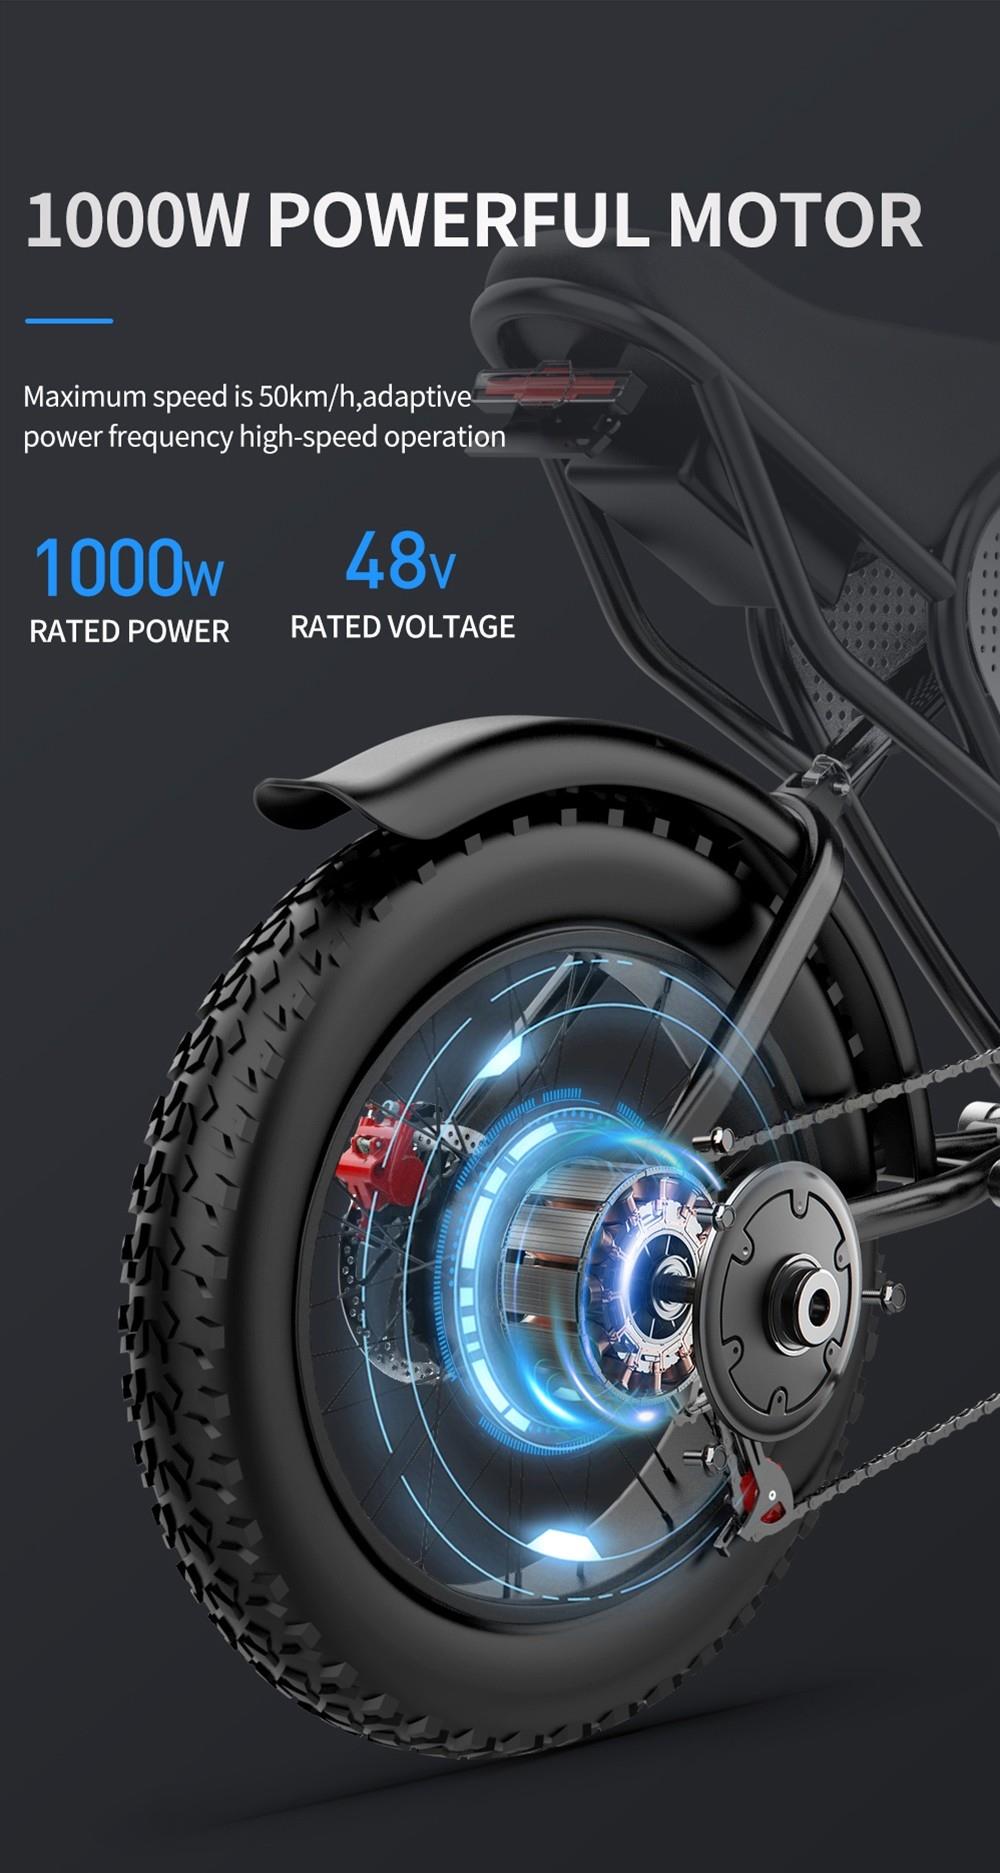 Ridstar Q20 all-terrain off-road electric bike with 1000W powerful motor 48V rated voltage